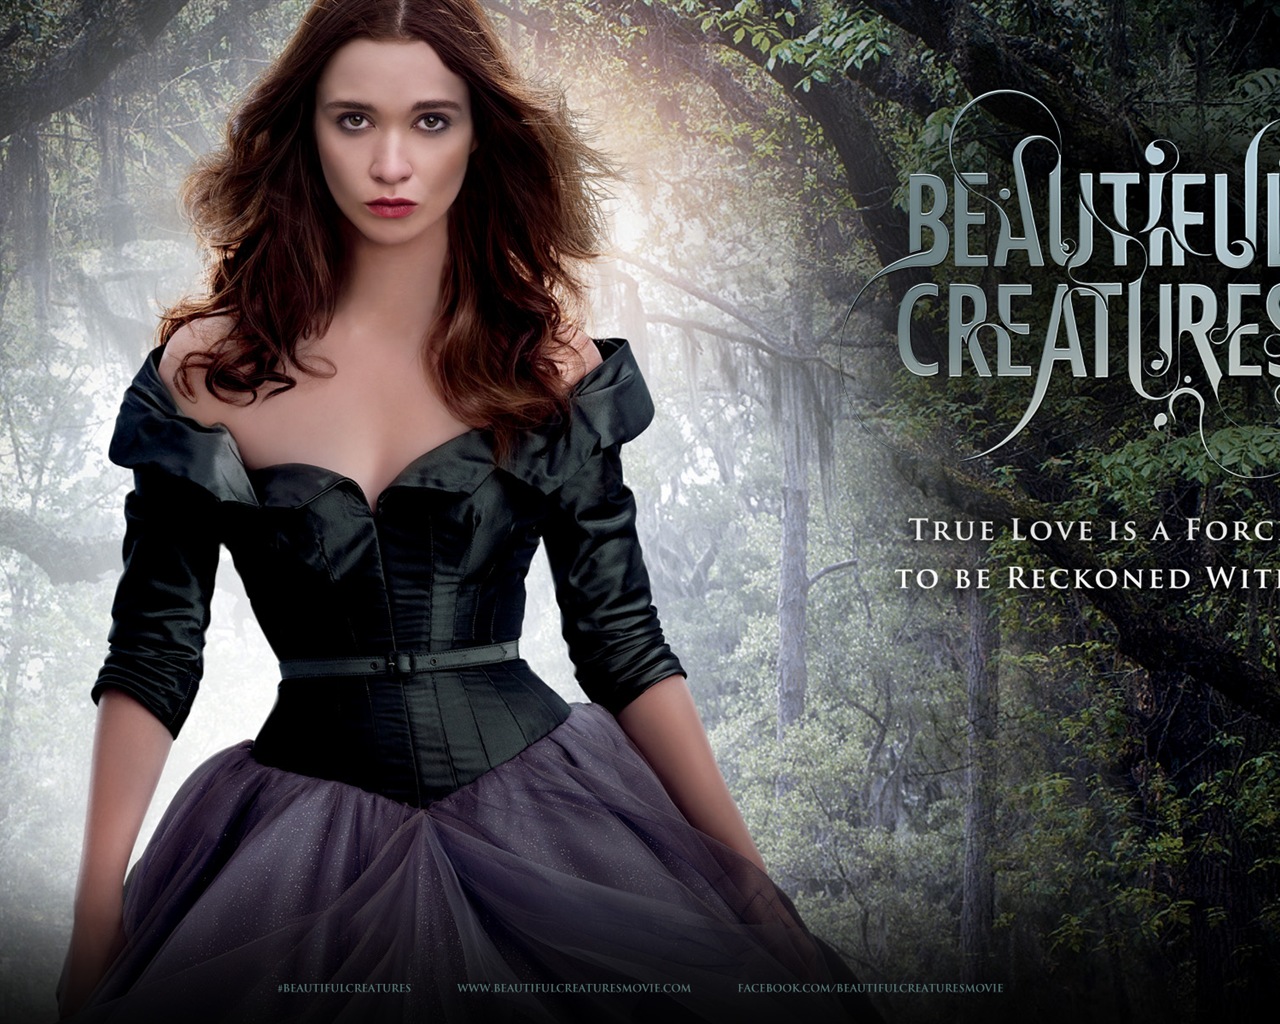 Beautiful Creatures 2013 HD movie wallpapers #7 - 1280x1024